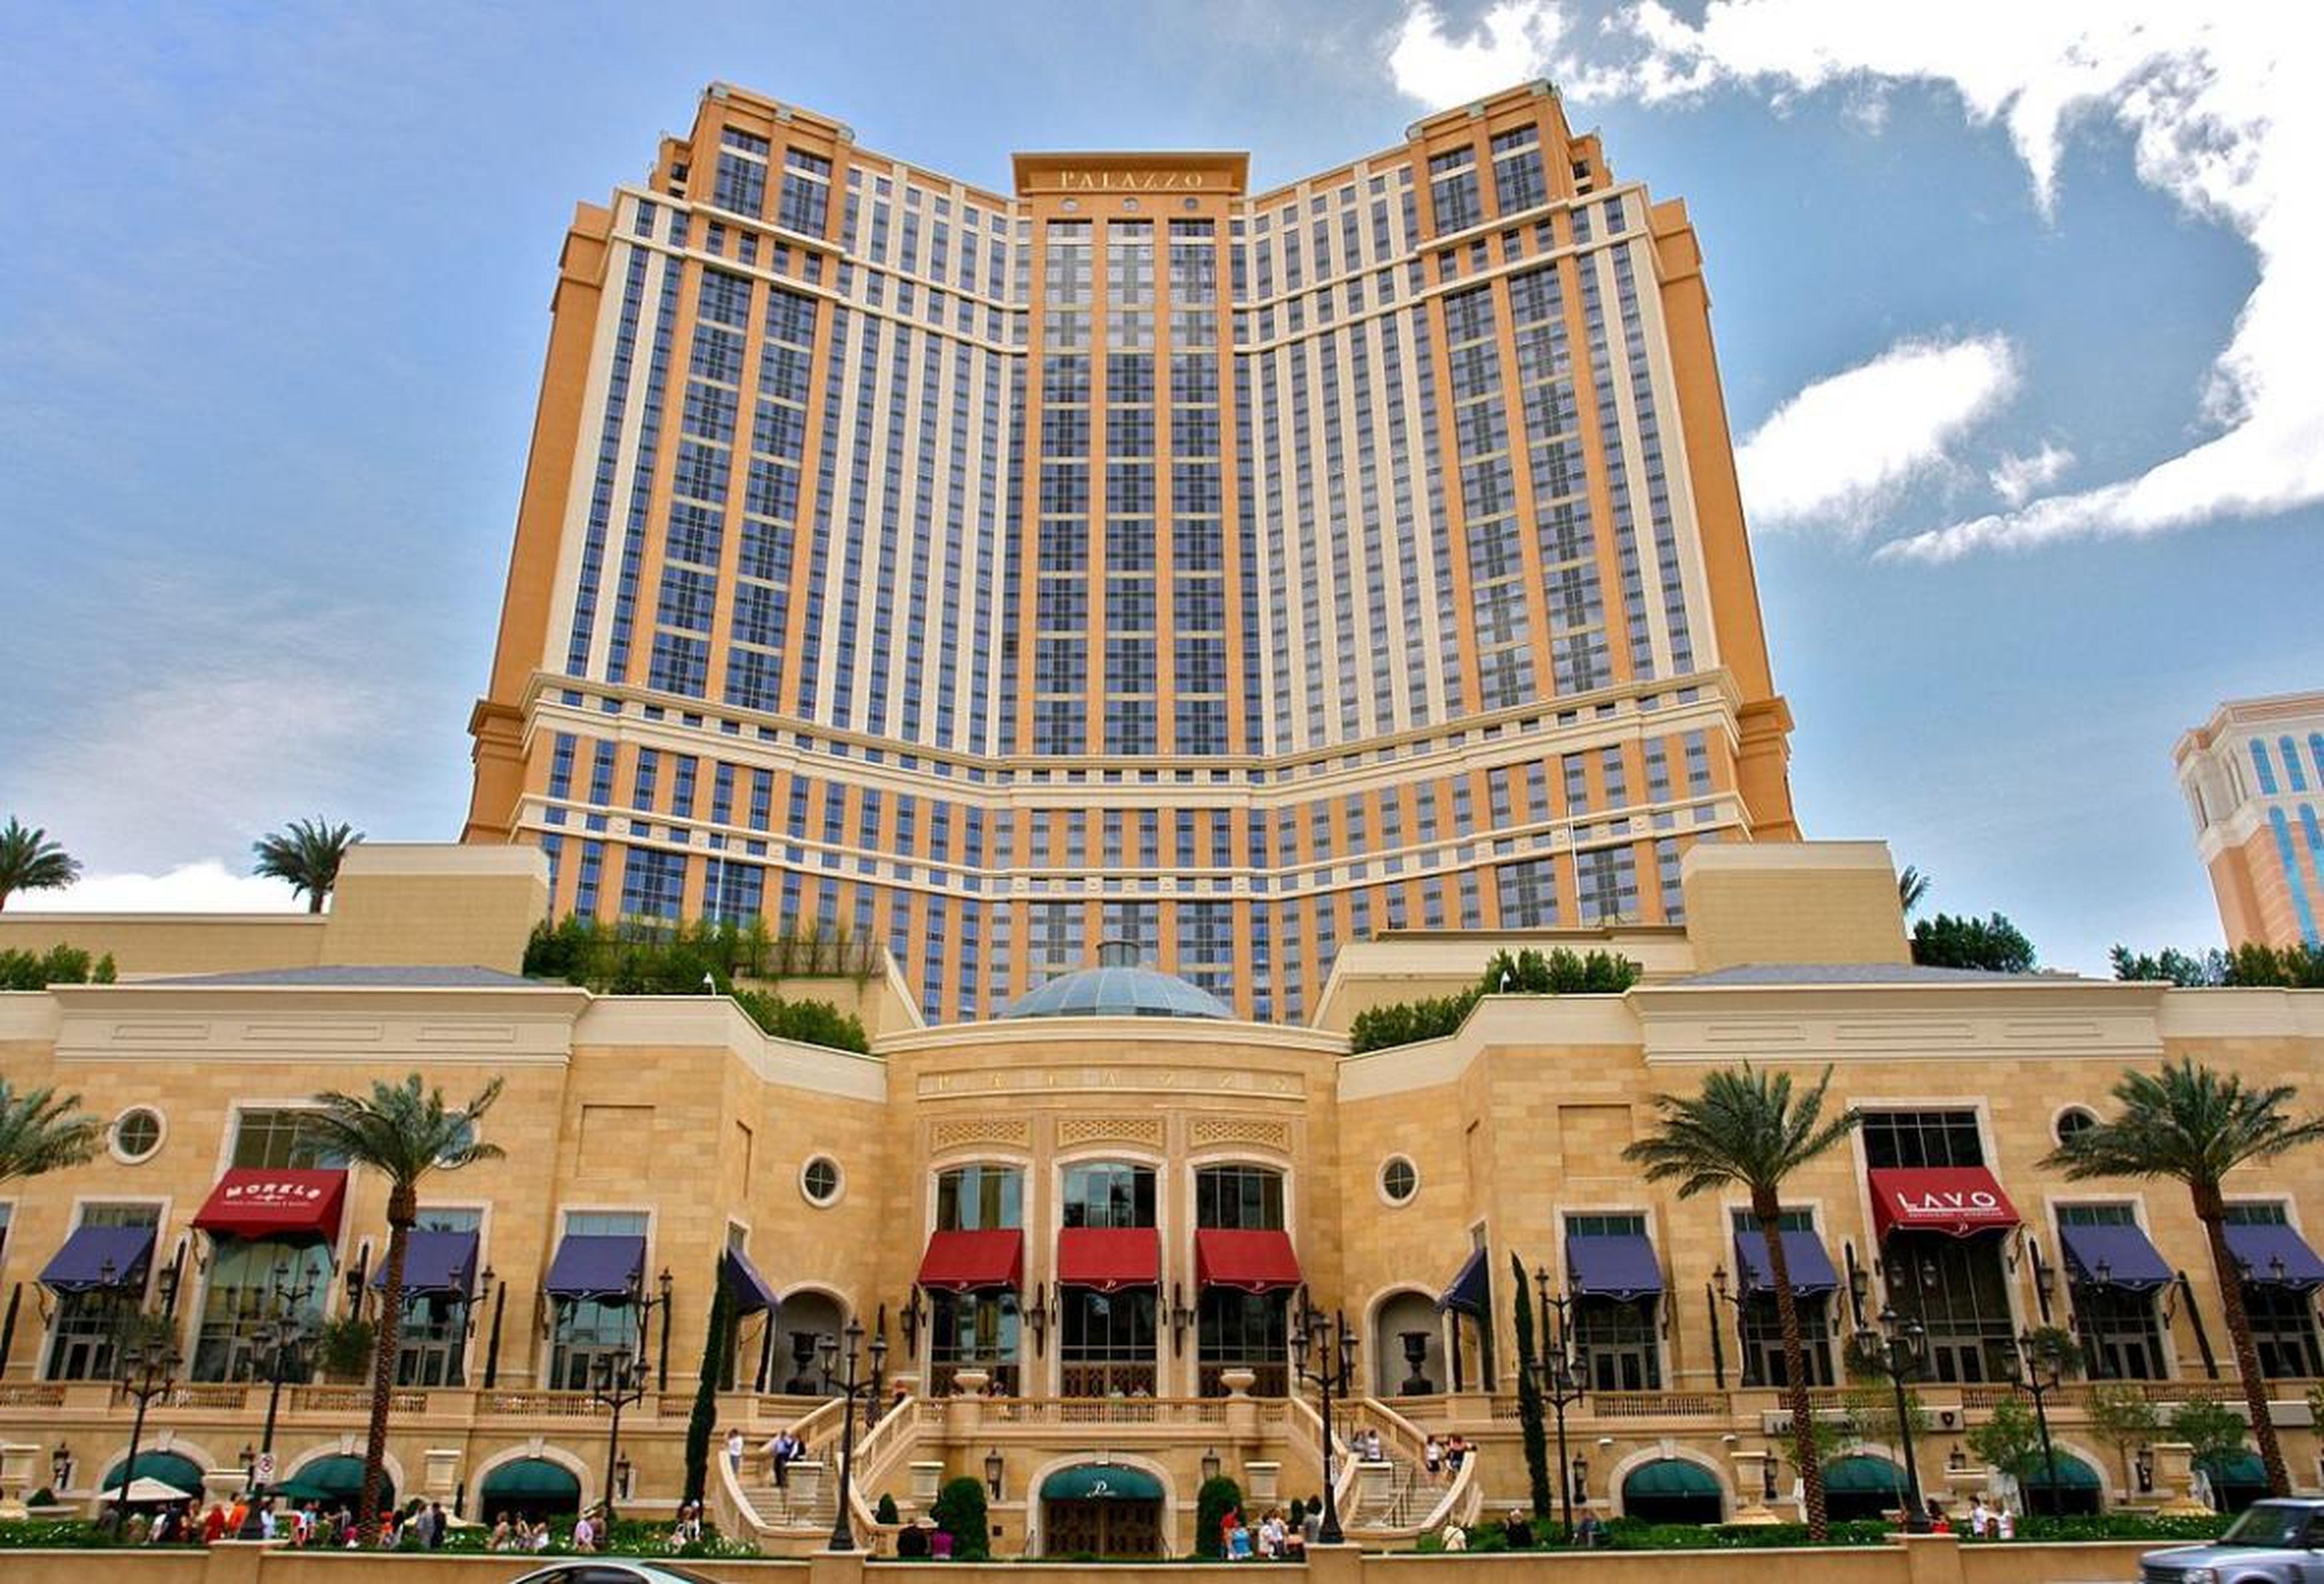 Built in 2007, the $2.05 billion Palazzo Casino is on the Las Vegas Strip.